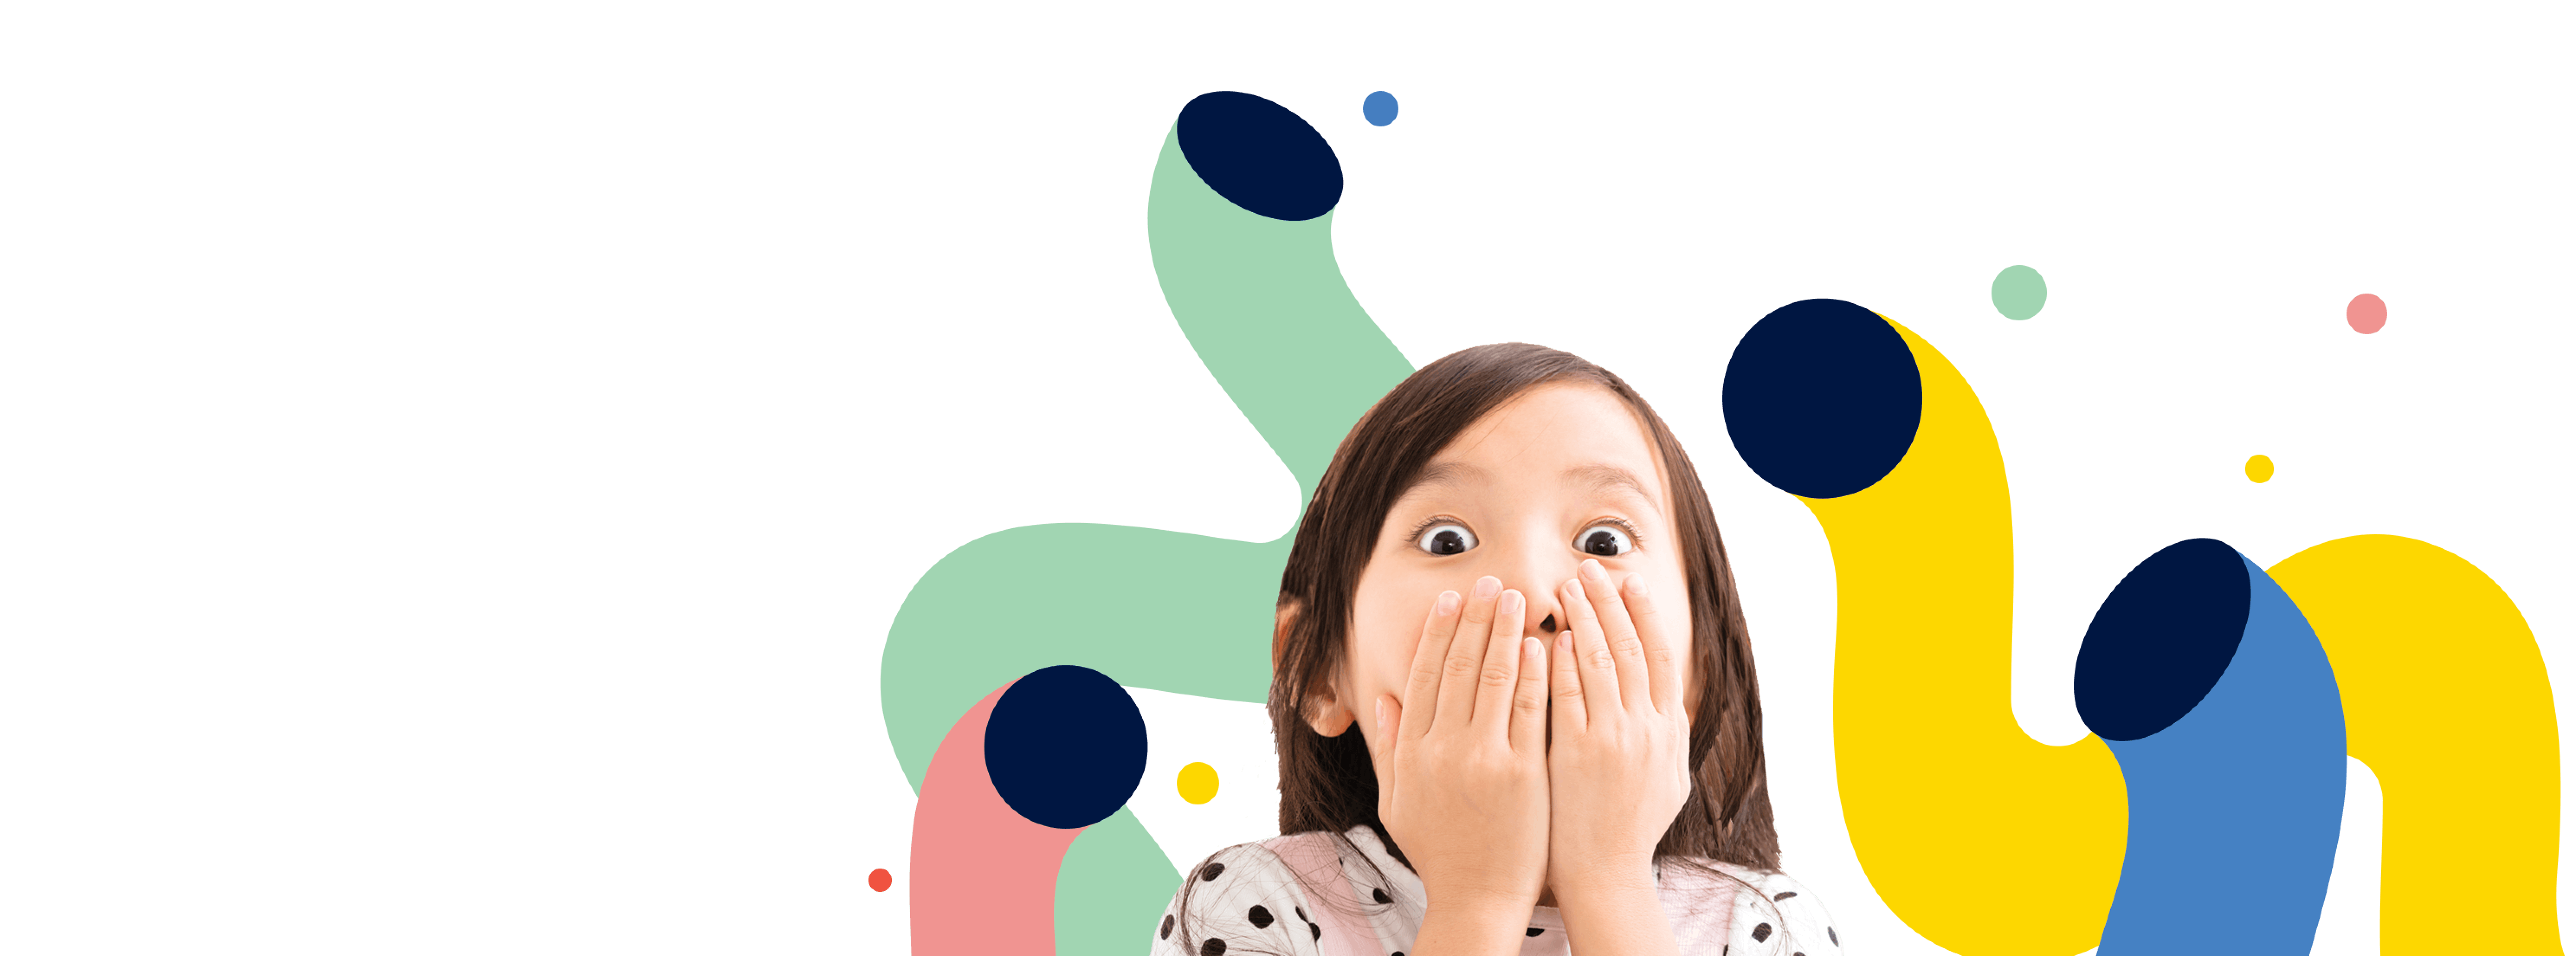 Illustration of a young girl covering her hands over her mouth in a look of surprise